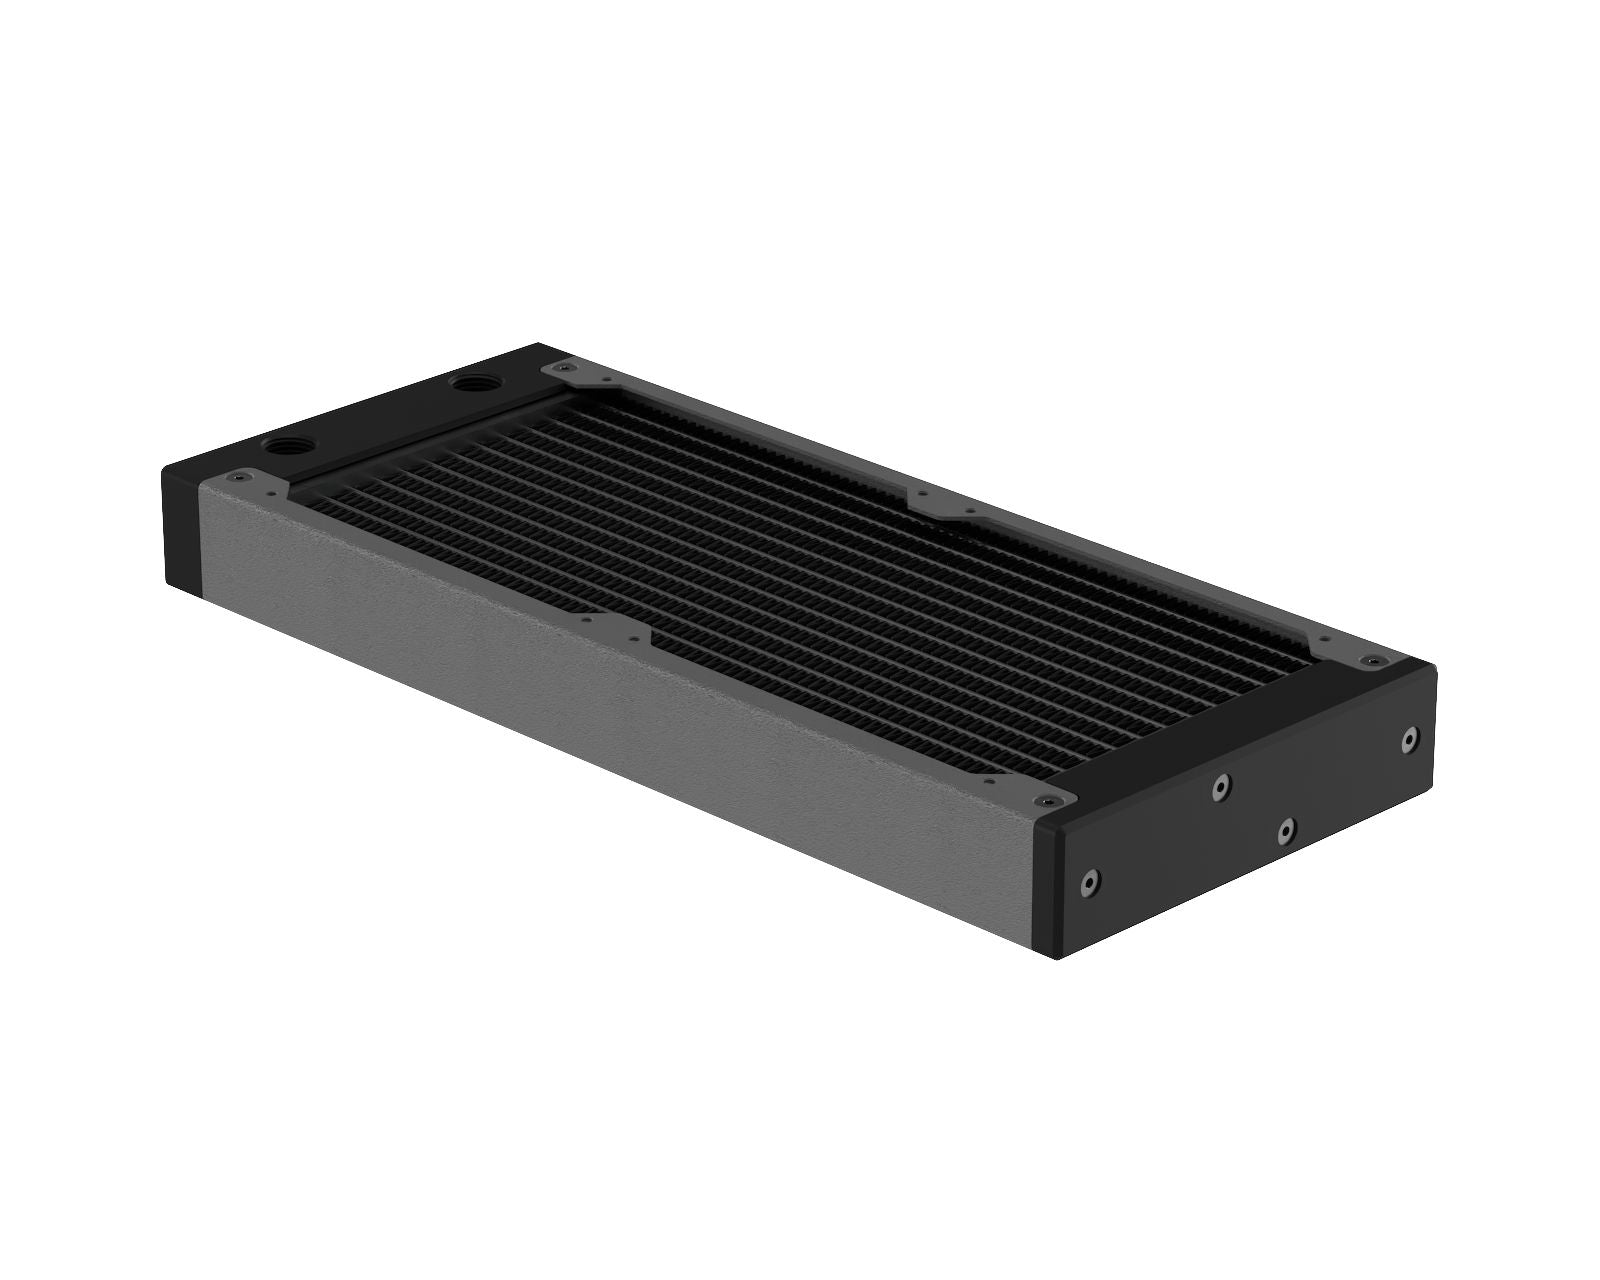 PrimoChill 240SL (30mm) EXIMO Modular Radiator, Black POM, 2x120mm, Dual Fan (R-SL-BK24) Available in 20+ Colors, Assembled in USA and Custom Watercooling Loop Ready - TX Matte Gun Metal